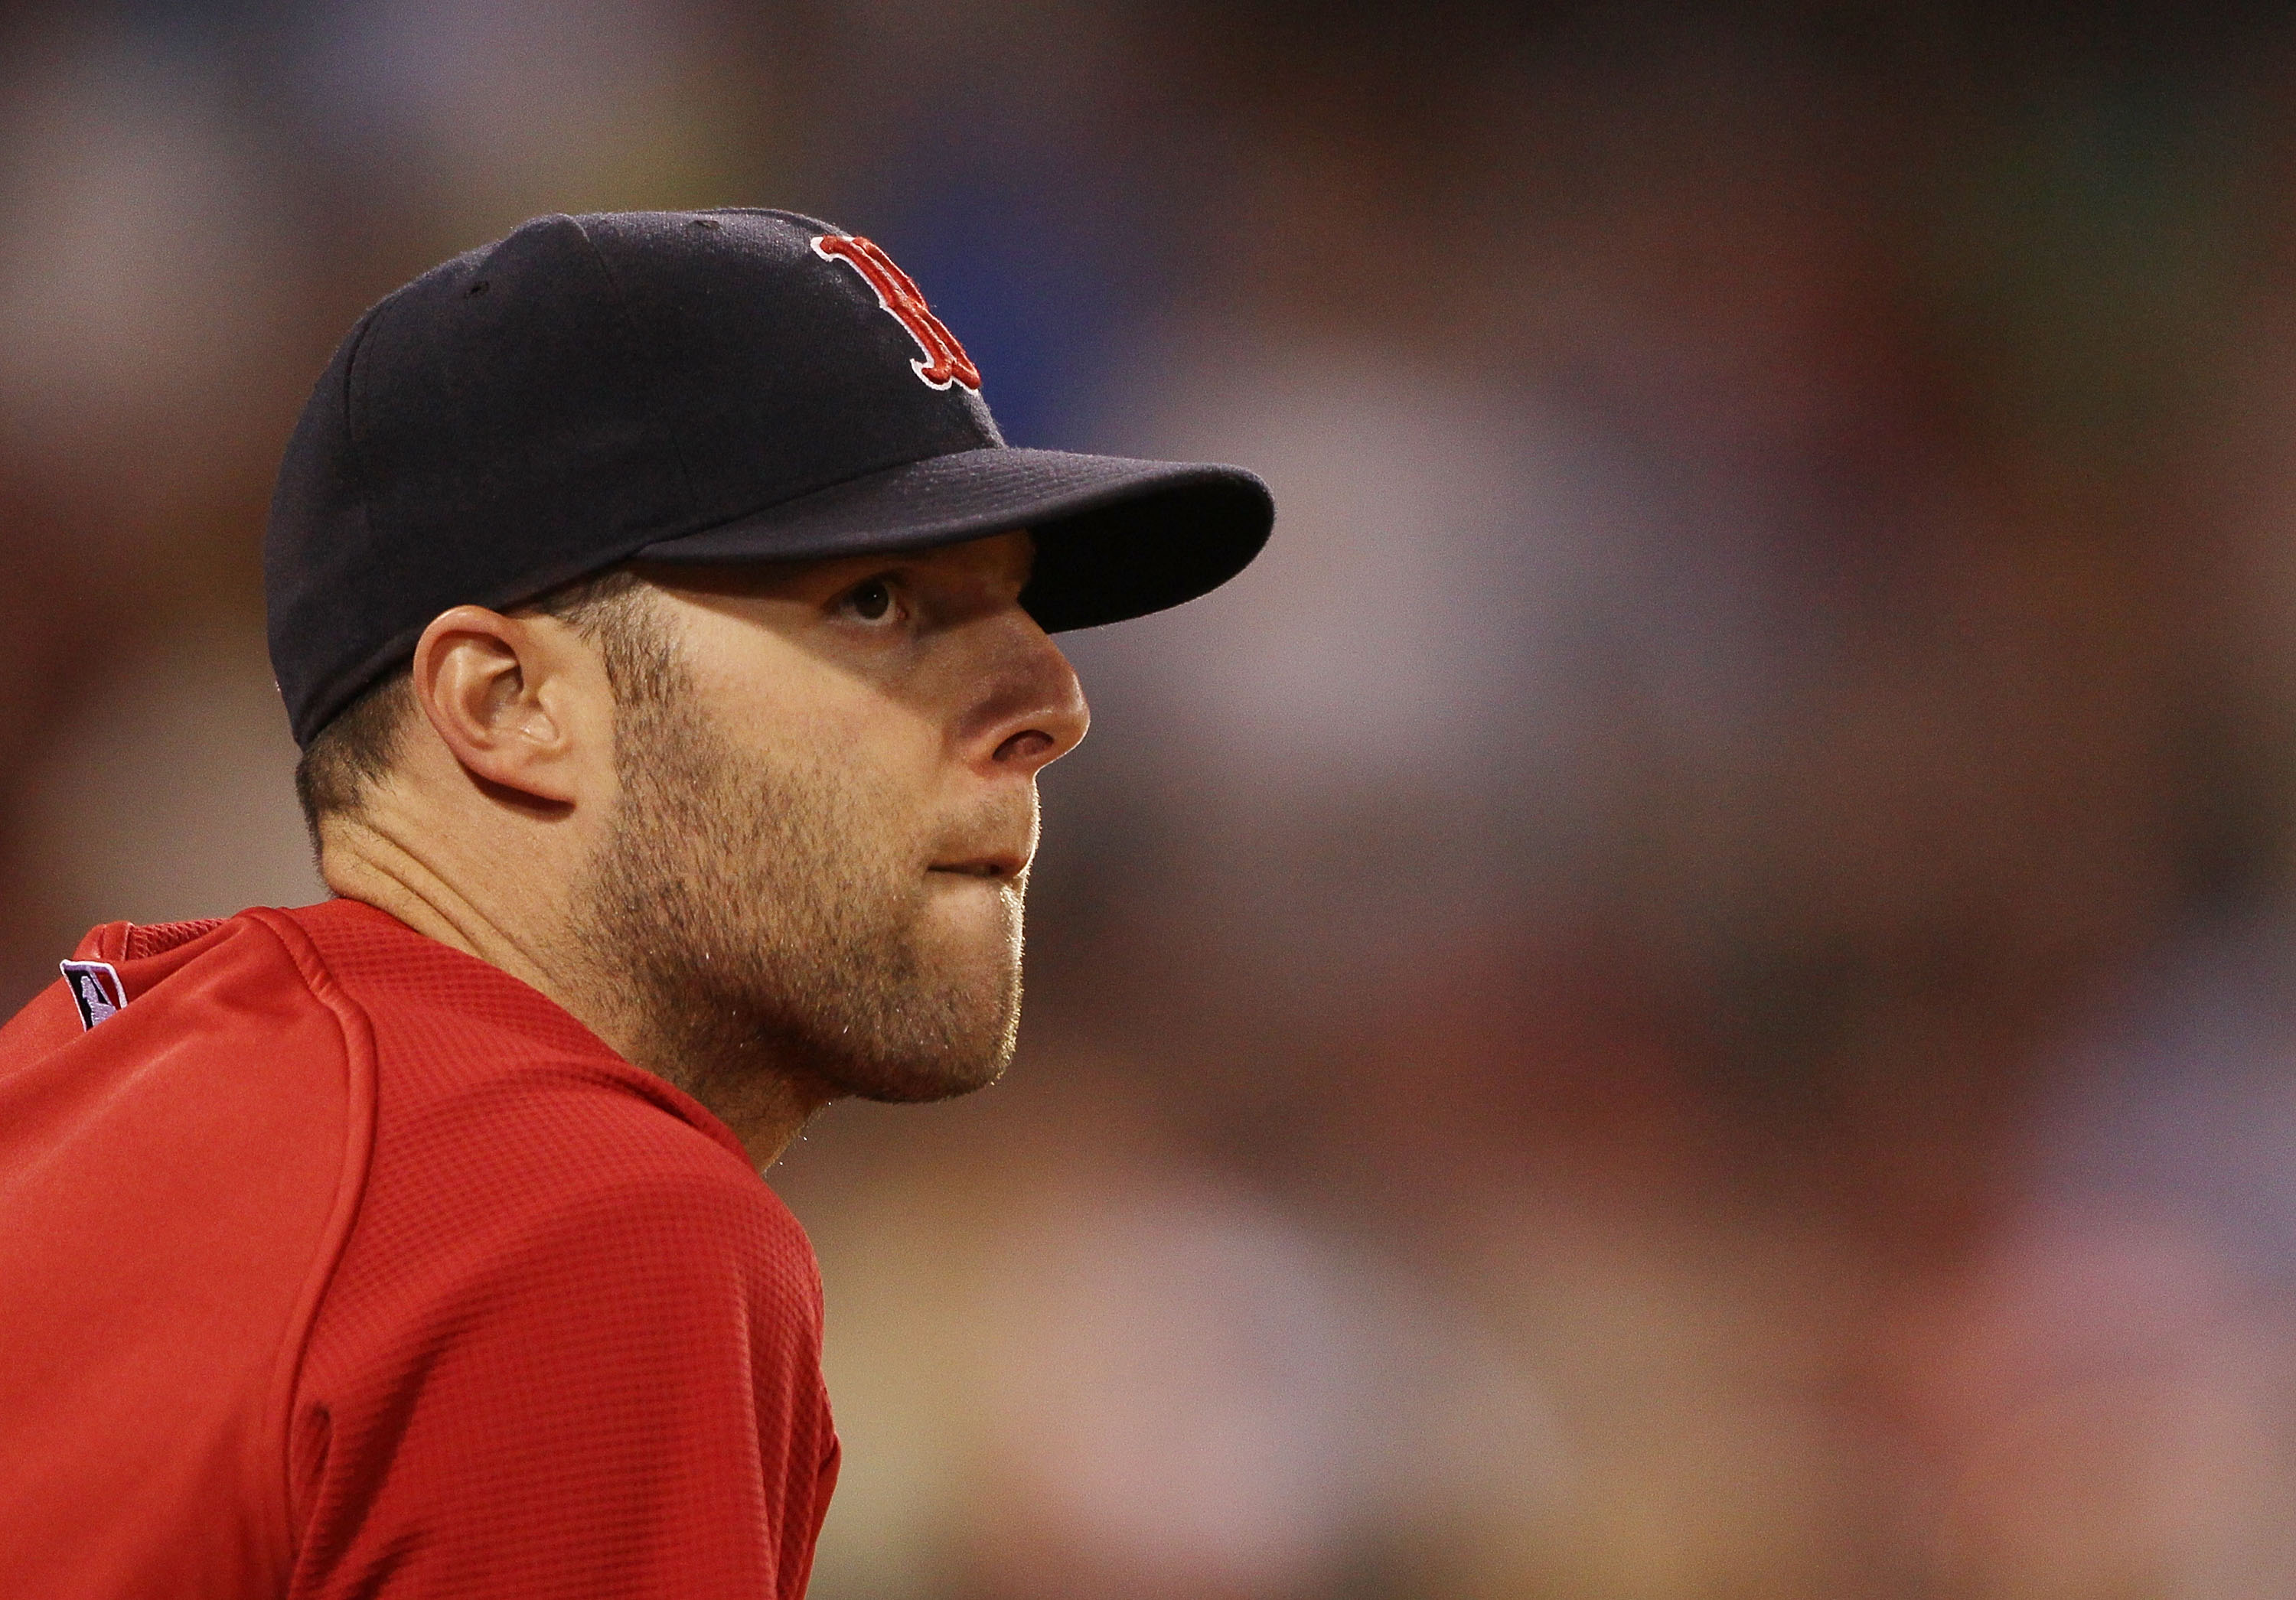 He played with a little chip on his shoulder': Dustin Pedroia's